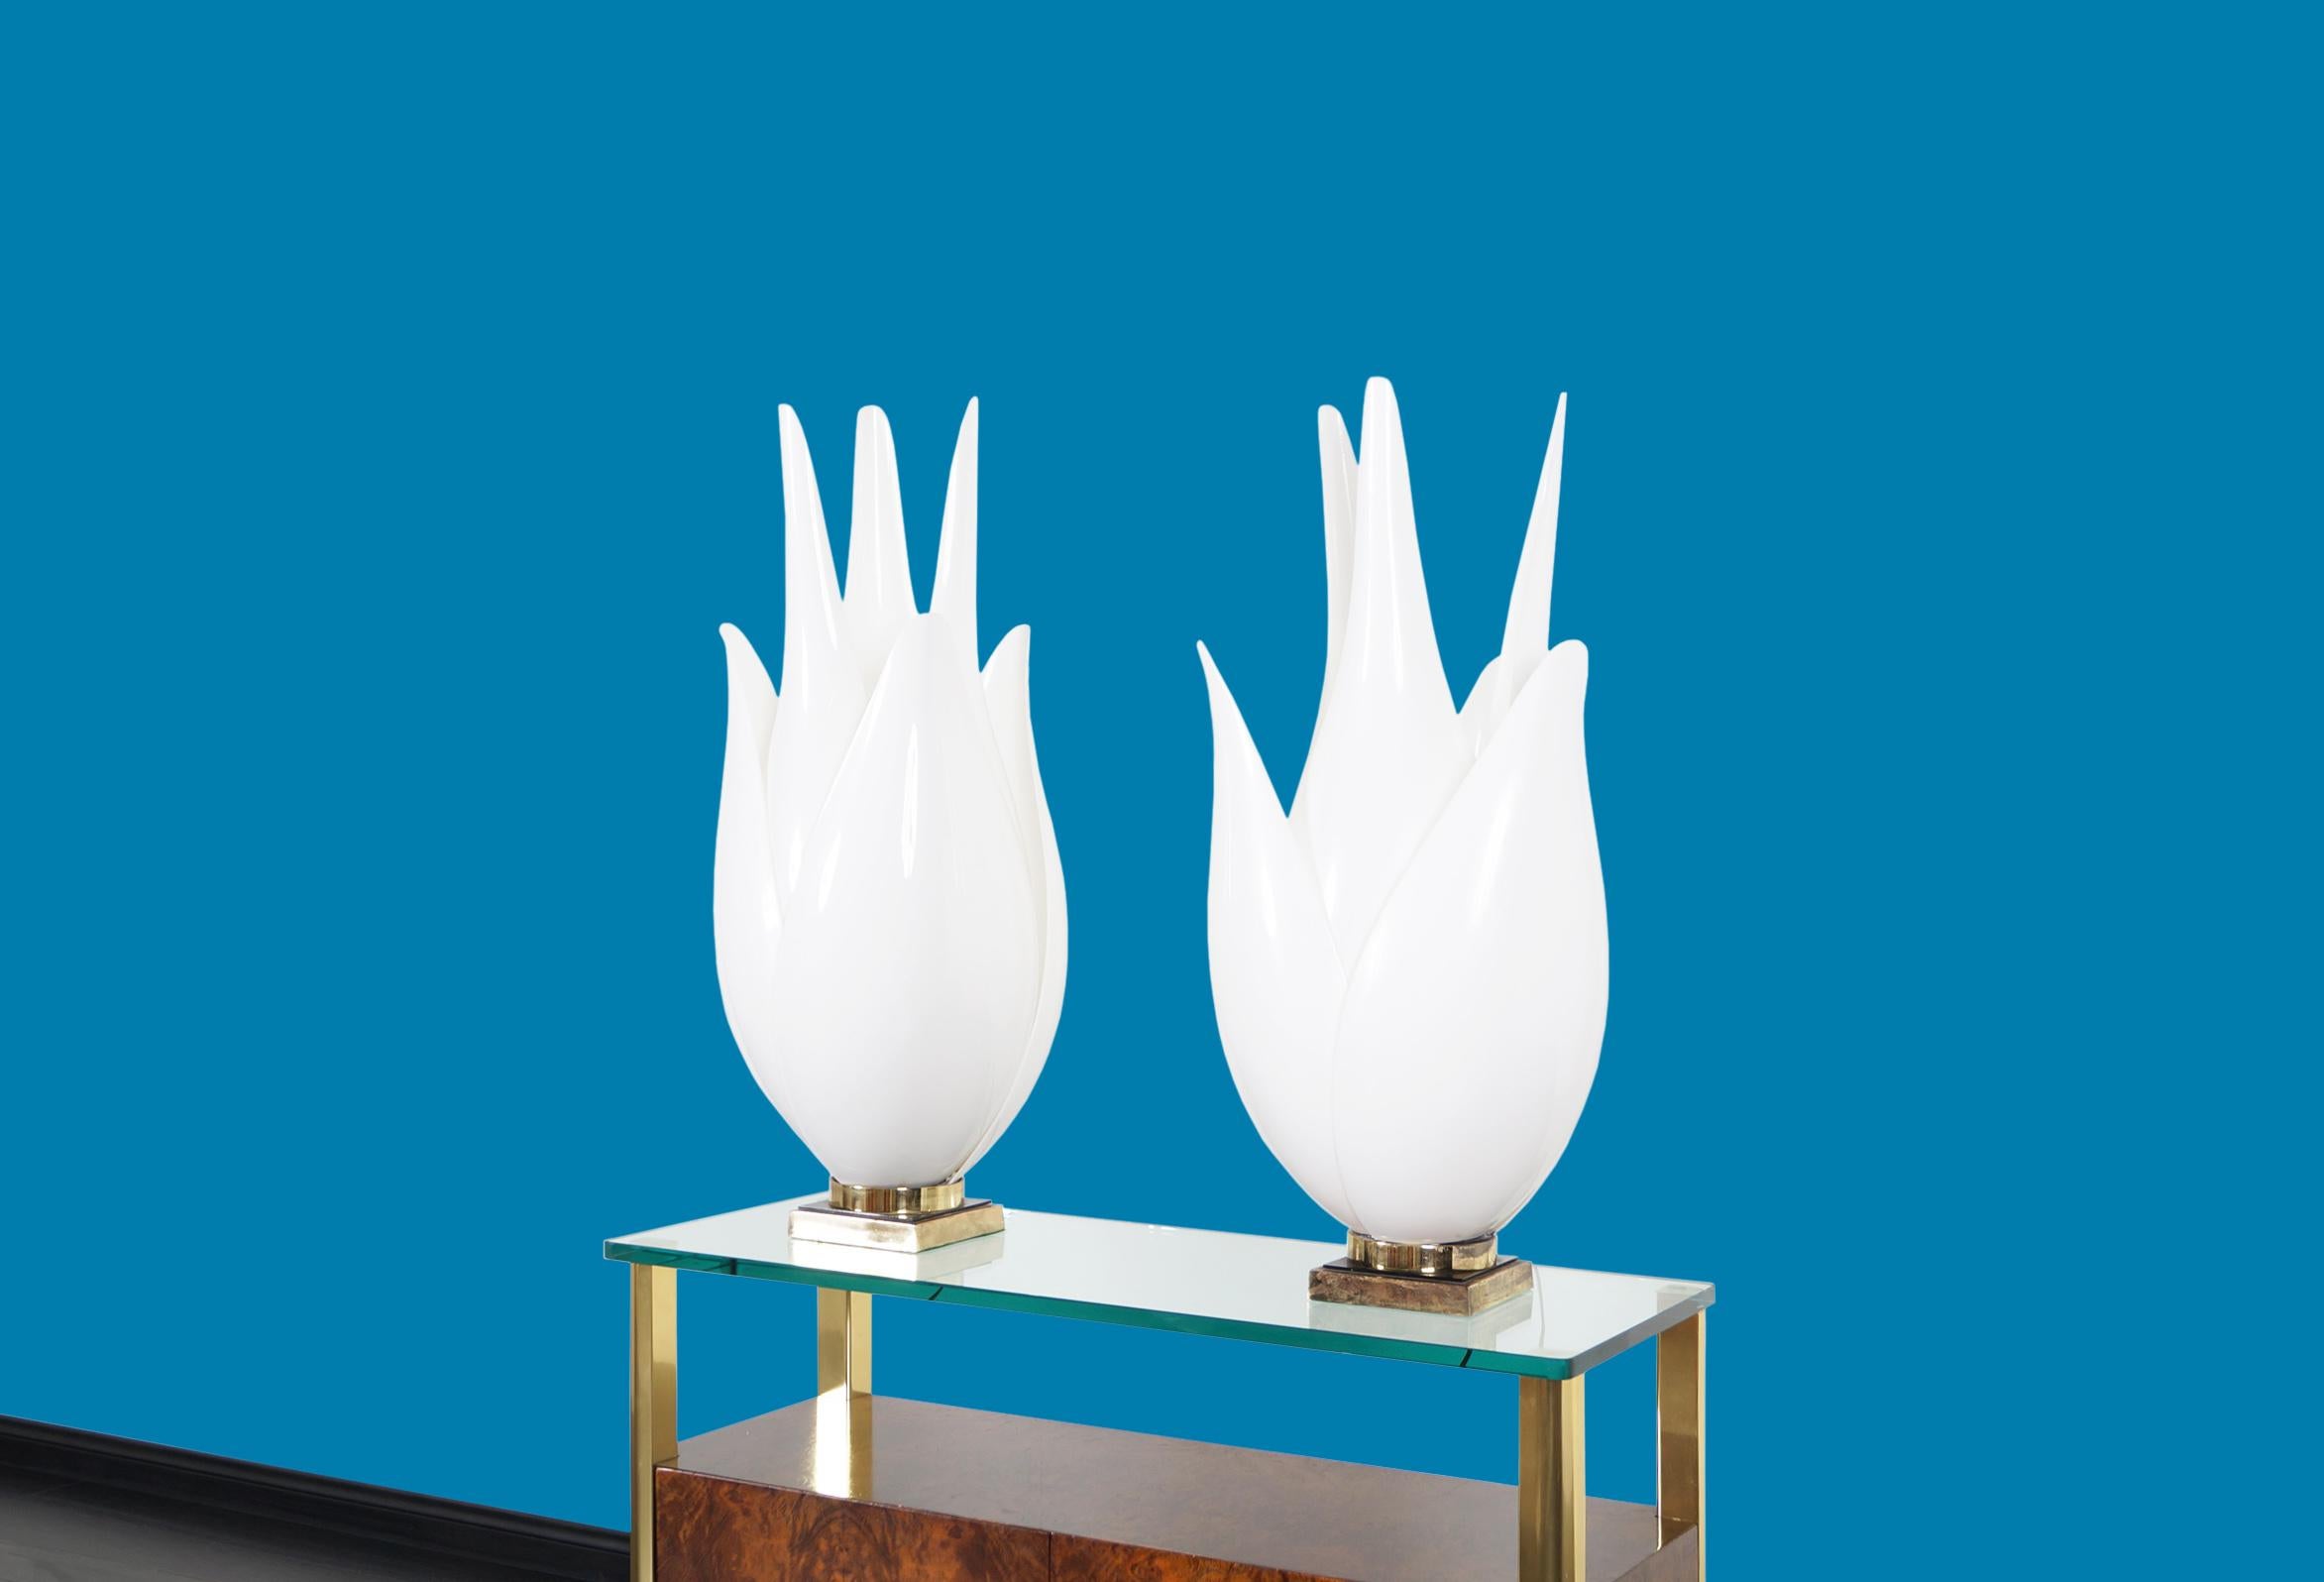 Spectacular vintage oversized “Tulip” lamps designed and manufactured by Roger Rougier in Canada, circa 1970s. These lamps have an elegant design where their fine curves stand out through their structure. The tulips represented in each lamp are